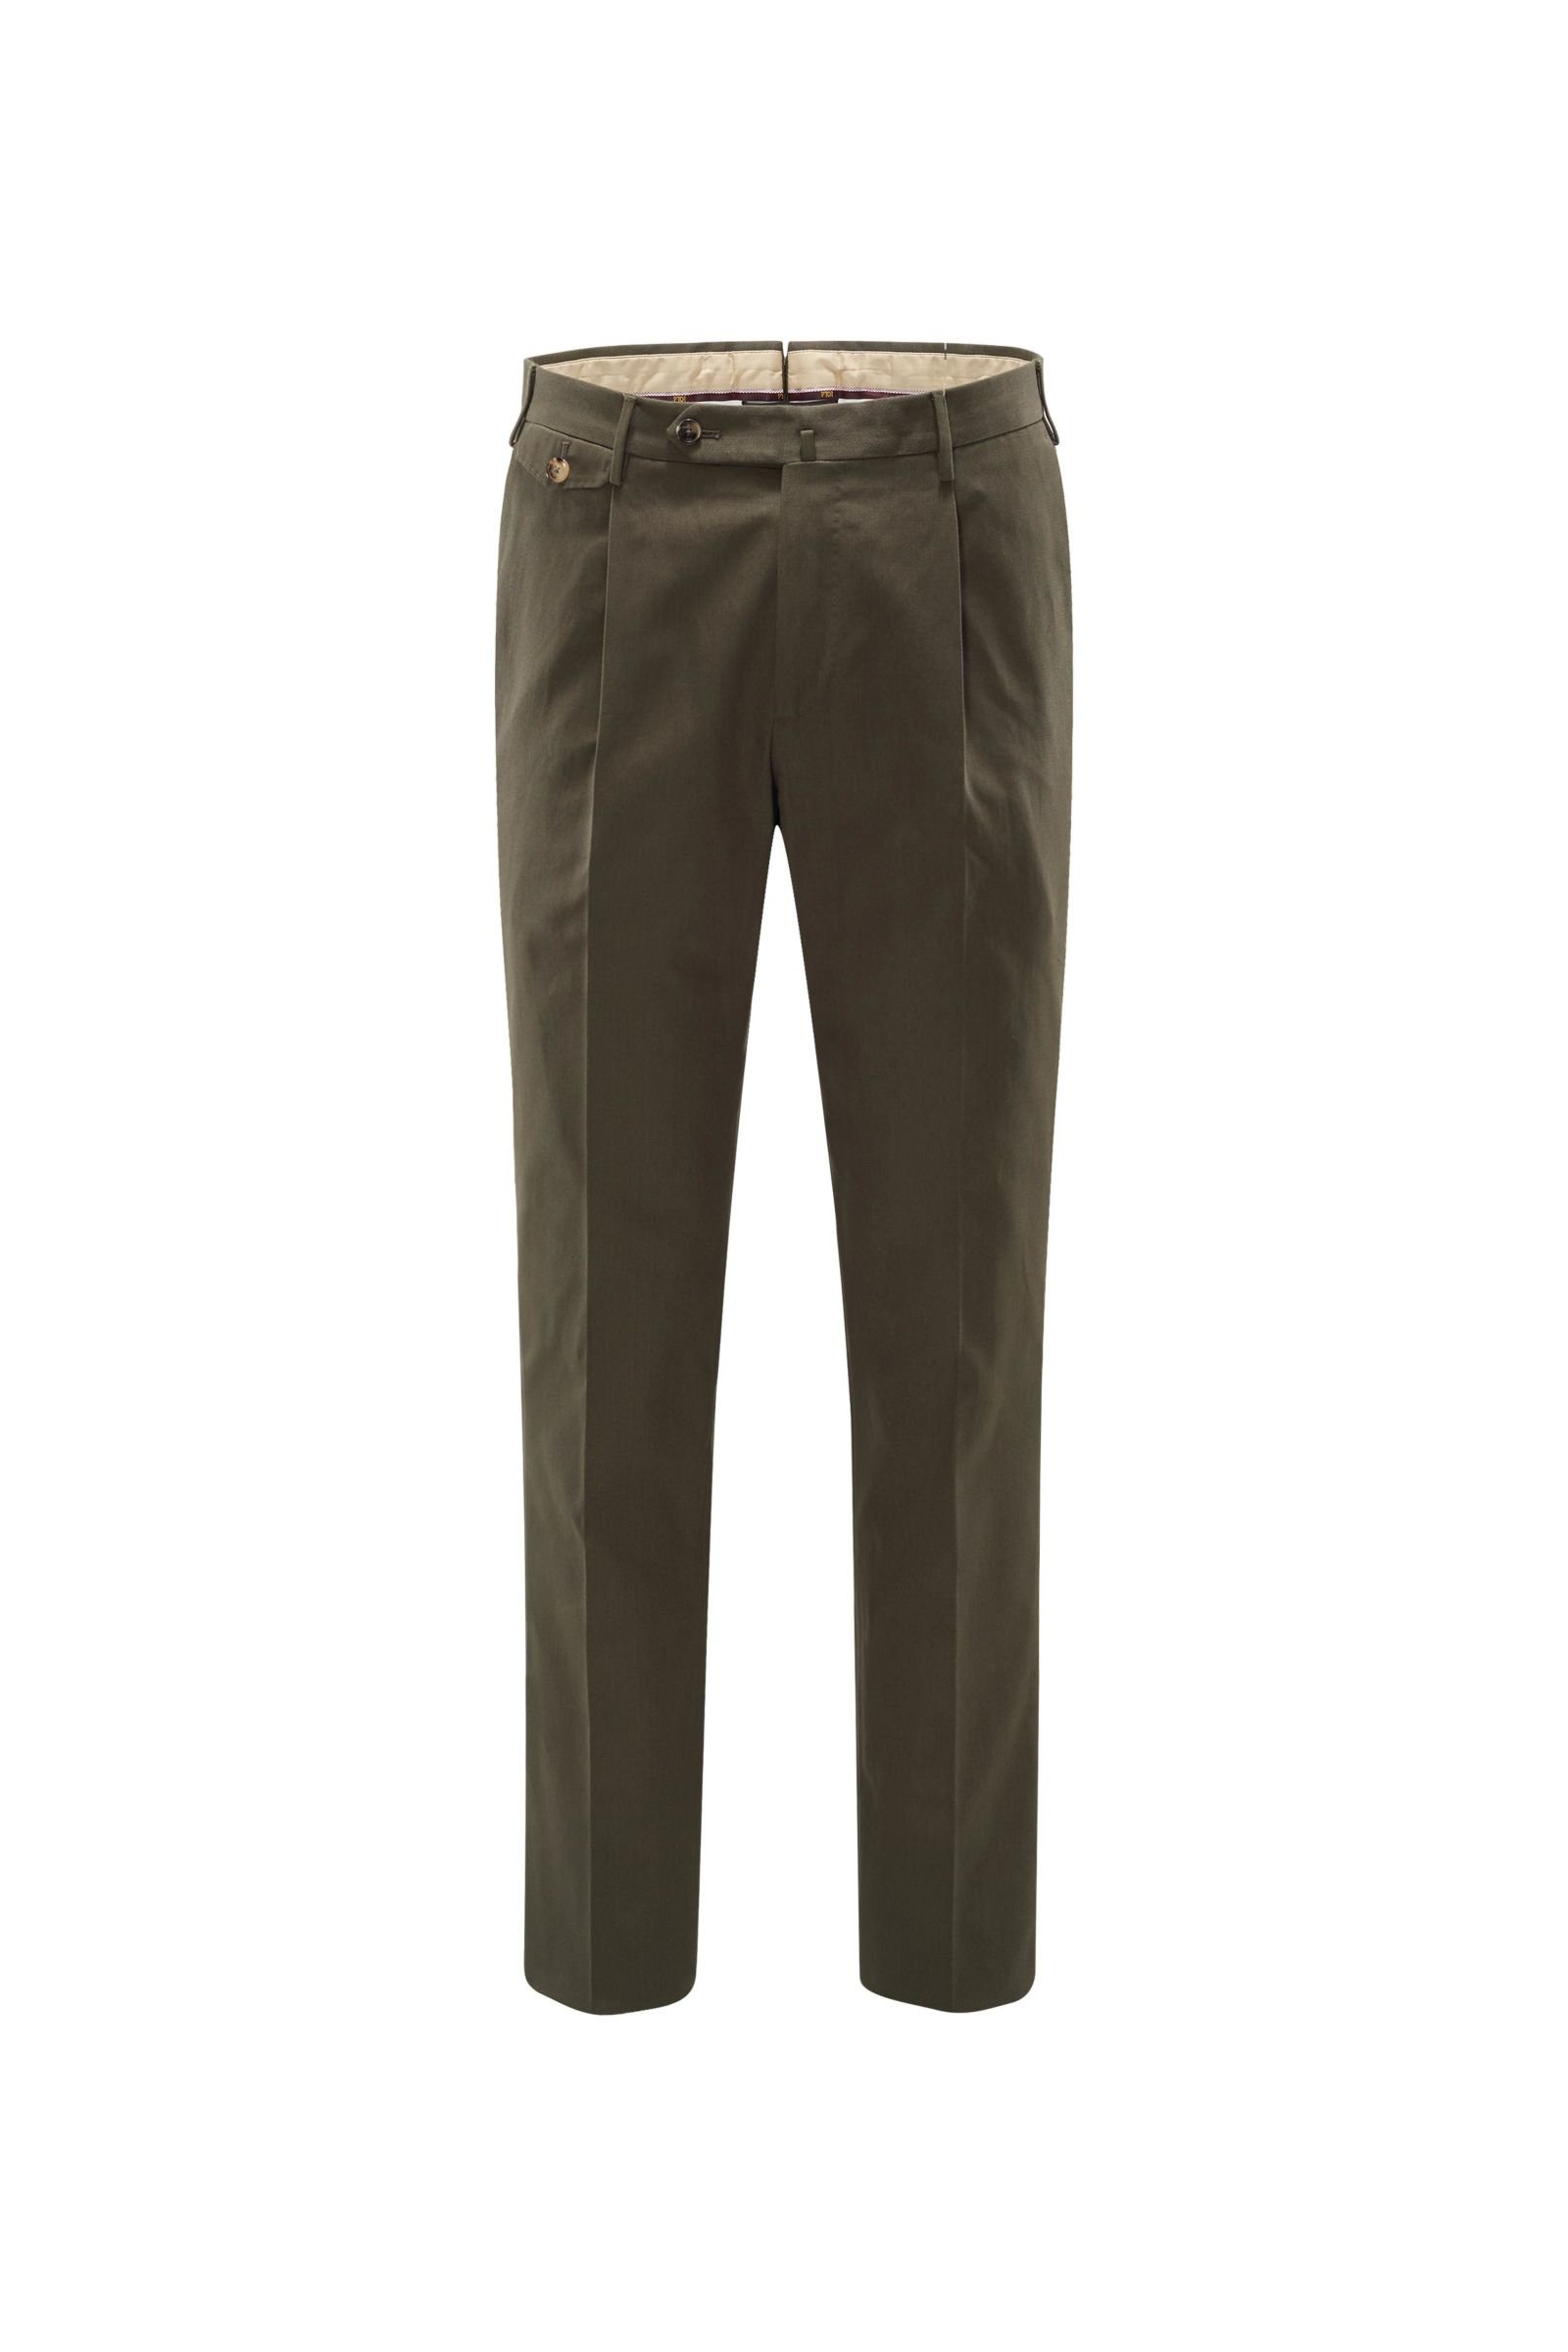 Cotton trousers 'The Draper Gentleman Fit' olive